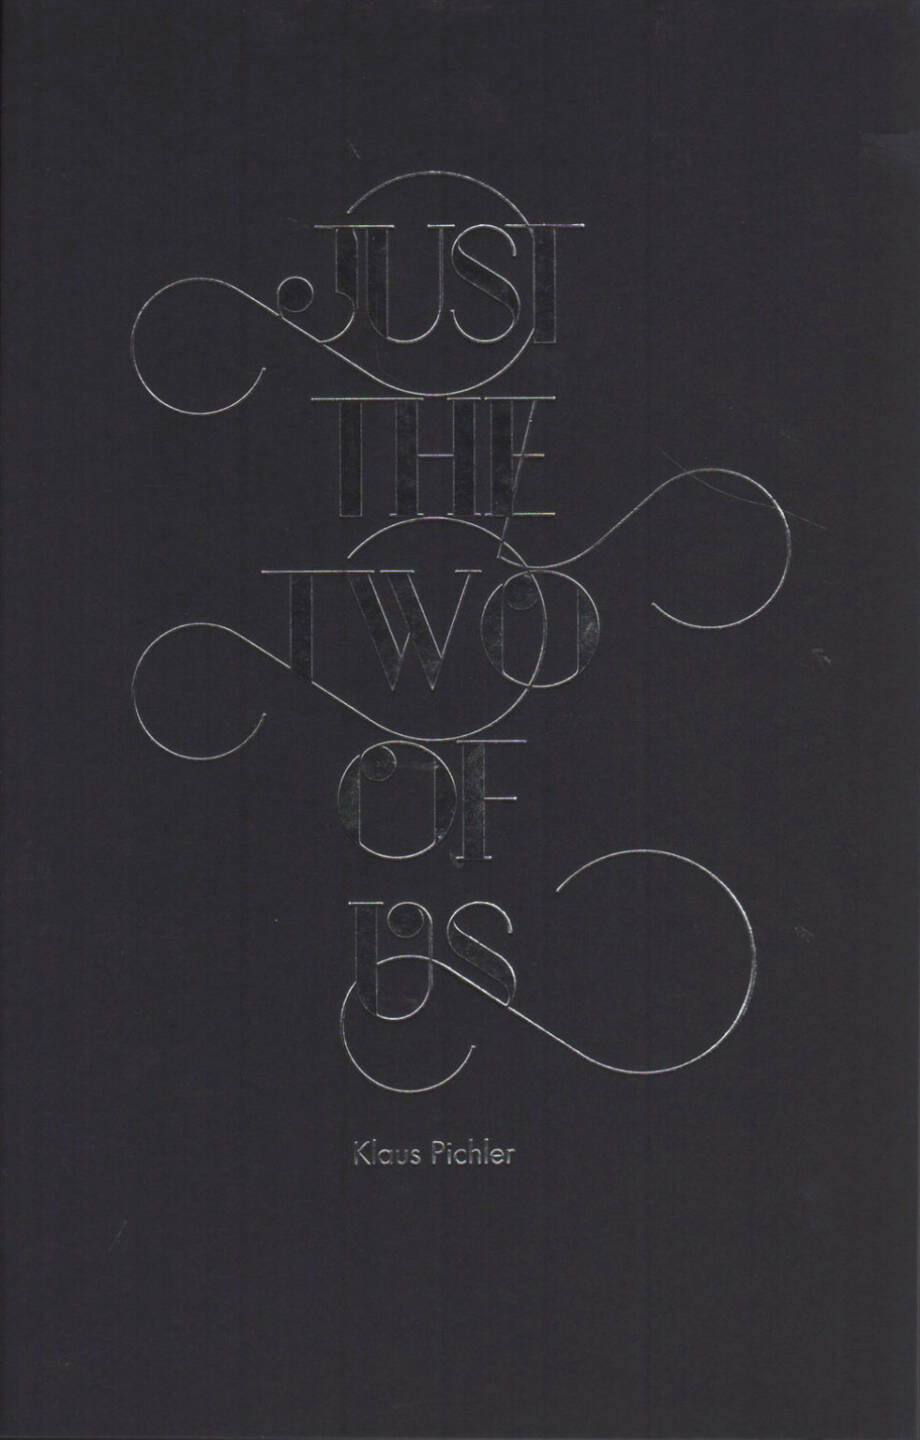 Klaus Pichler - Just the two of us, Self published 2014, Cover - http://josefchladek.com/book/klaus_pichler_-_just_the_two_of_us